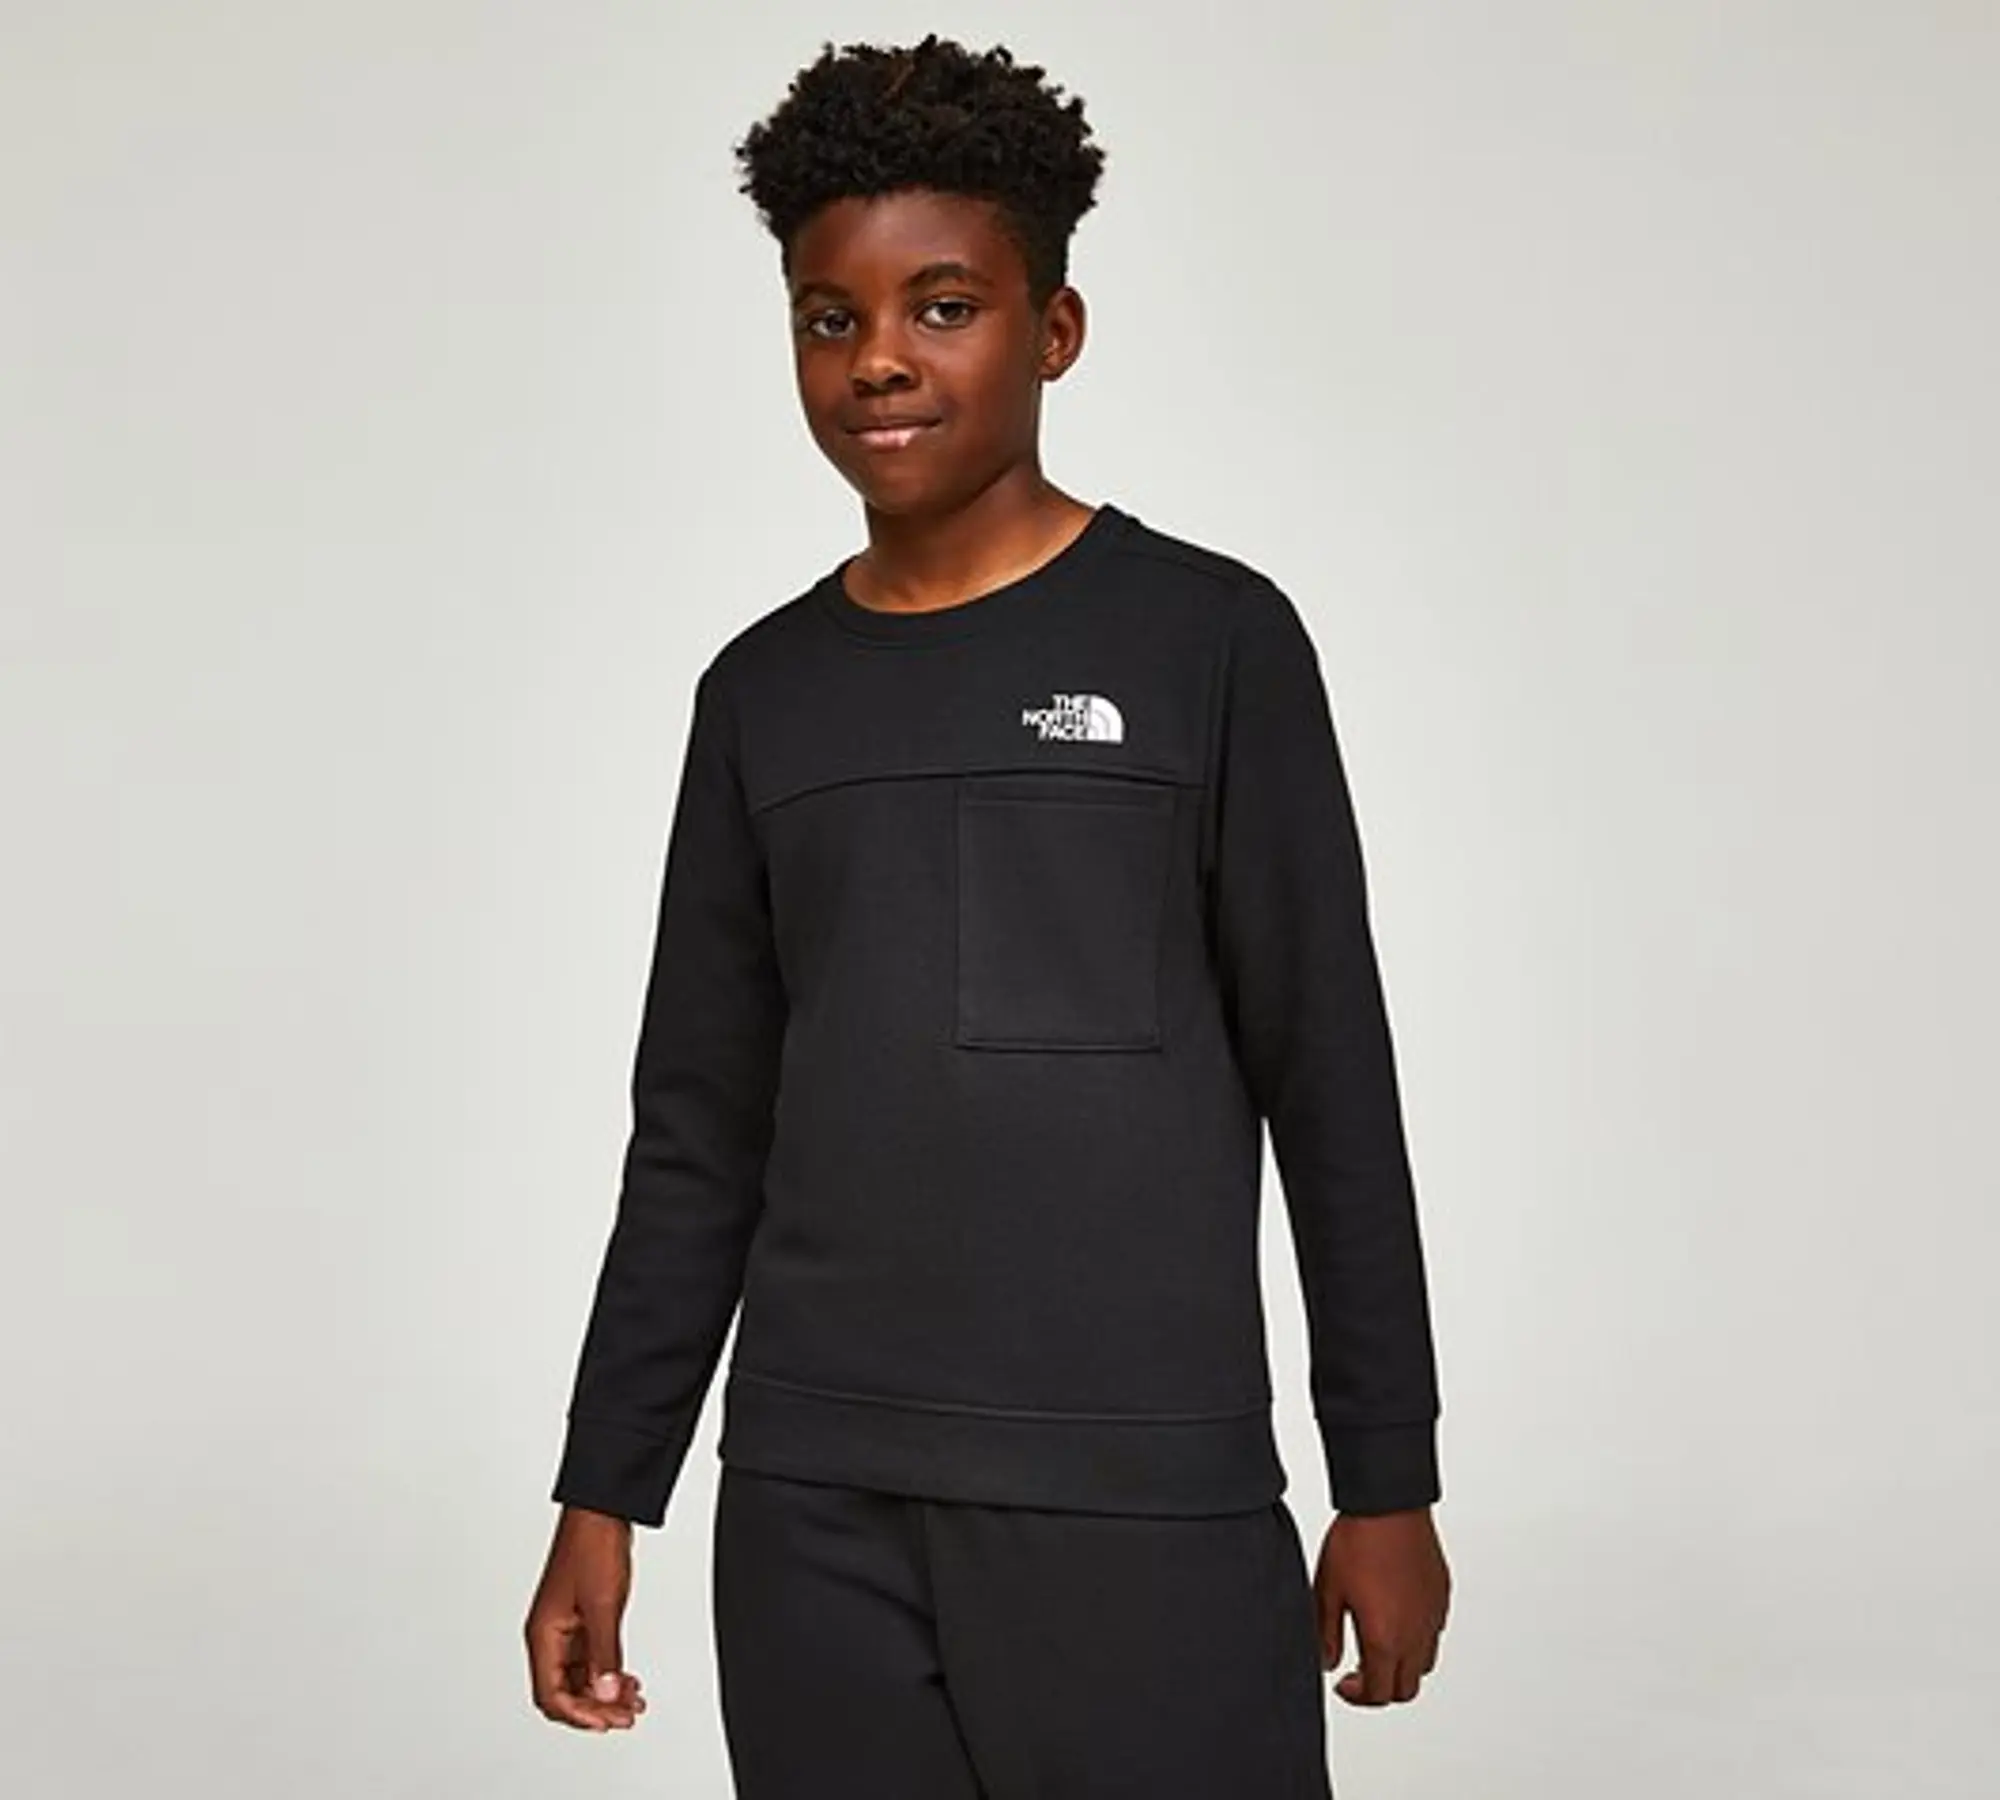 Boys, THE NORTH FACE The North Face Unisex Tech Crew, Black